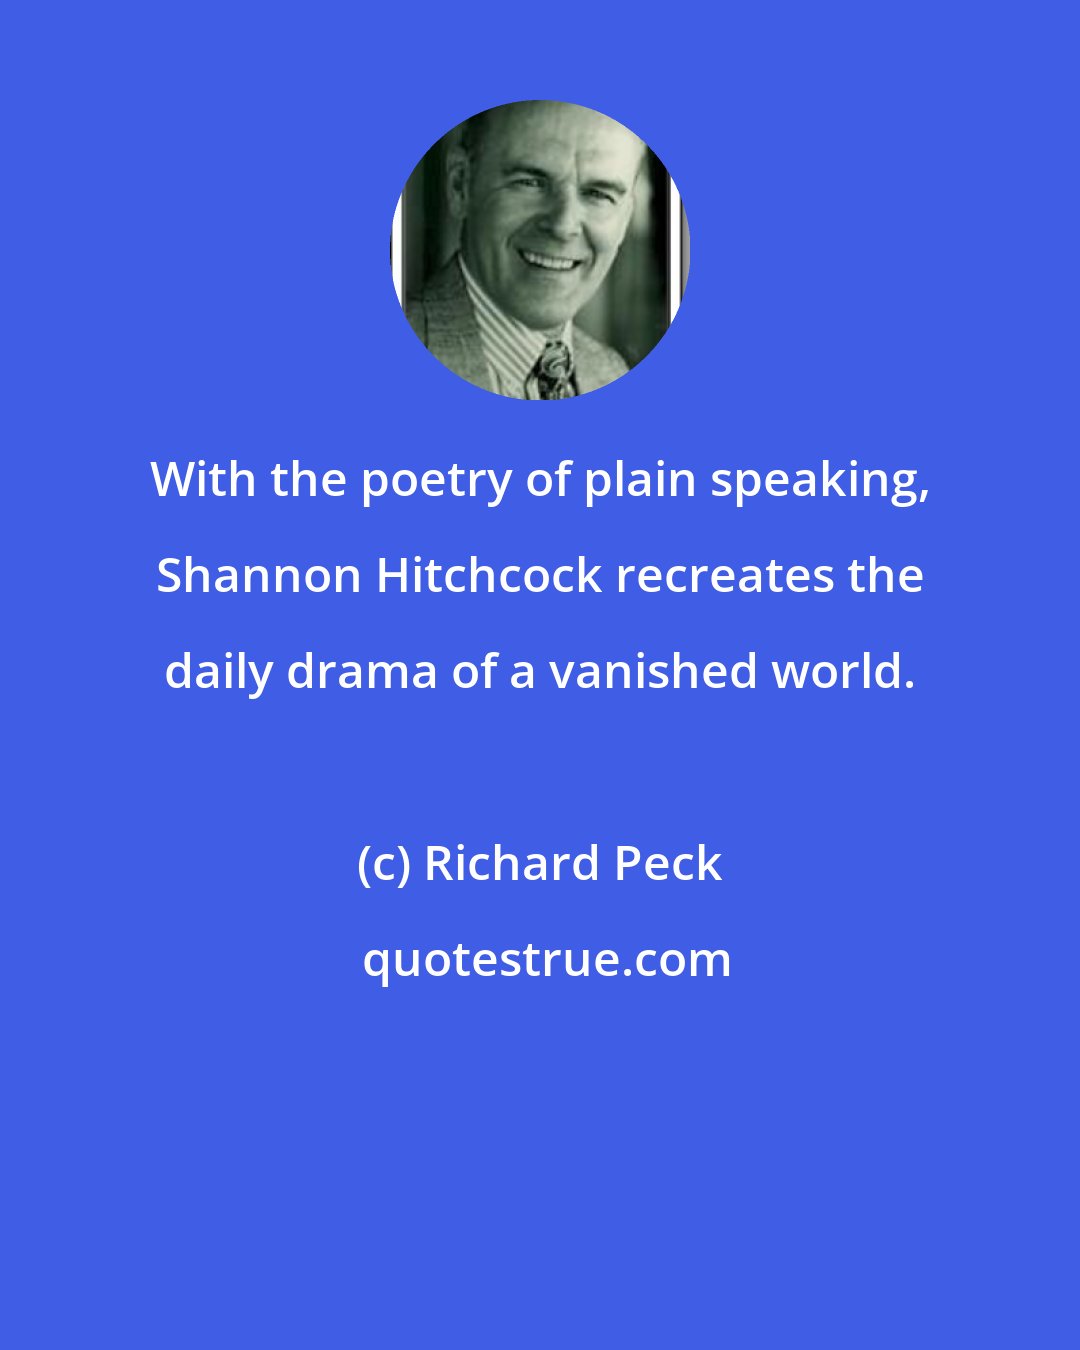 Richard Peck: With the poetry of plain speaking, Shannon Hitchcock recreates the daily drama of a vanished world.